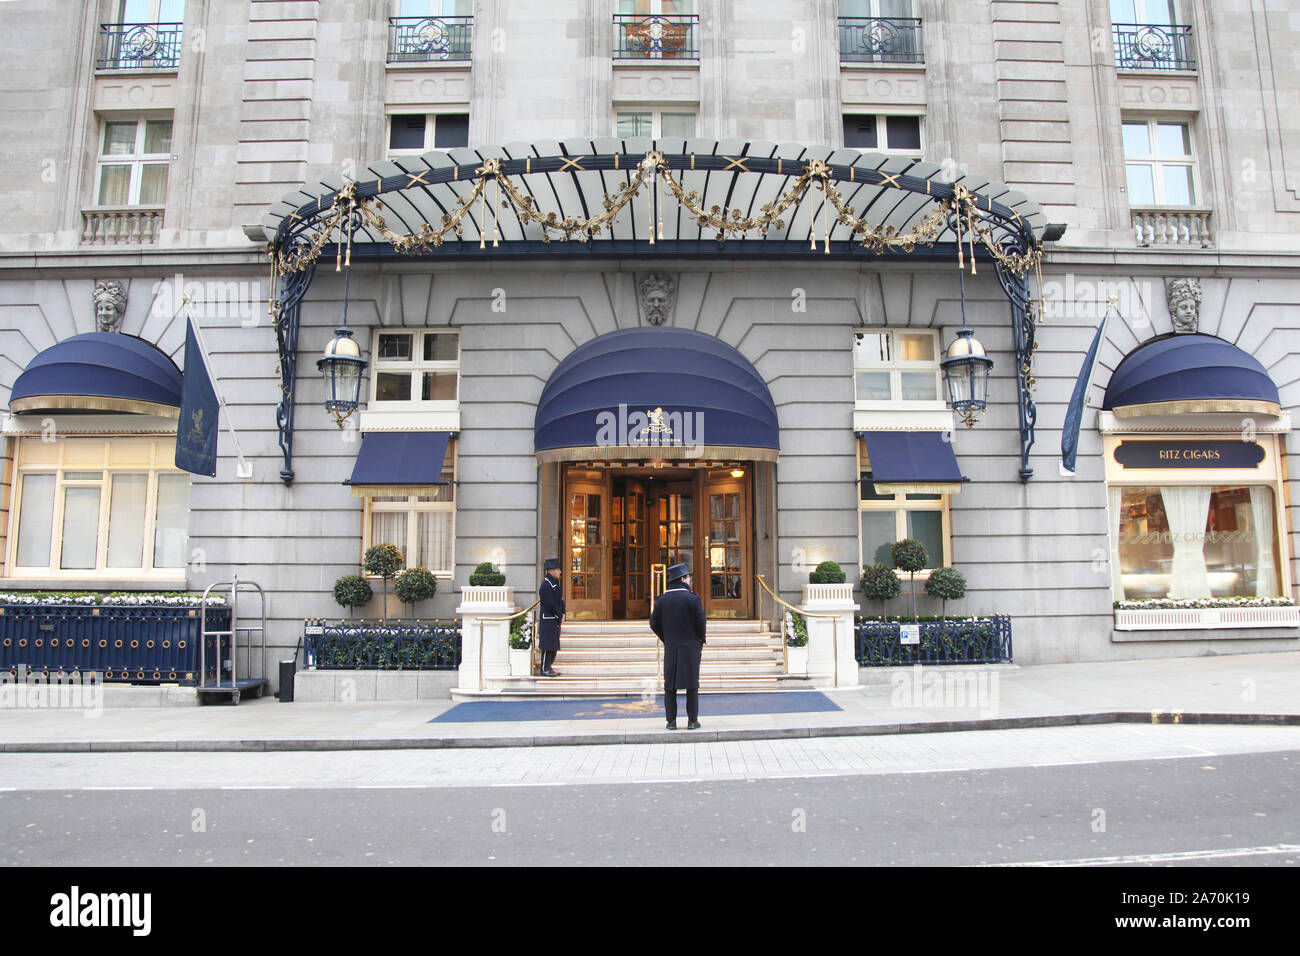 Entrance to The Ritz Hotel on Arlington Street, Mayfair, London with two doormen standing outside, wide shot, daytime Stock Photo